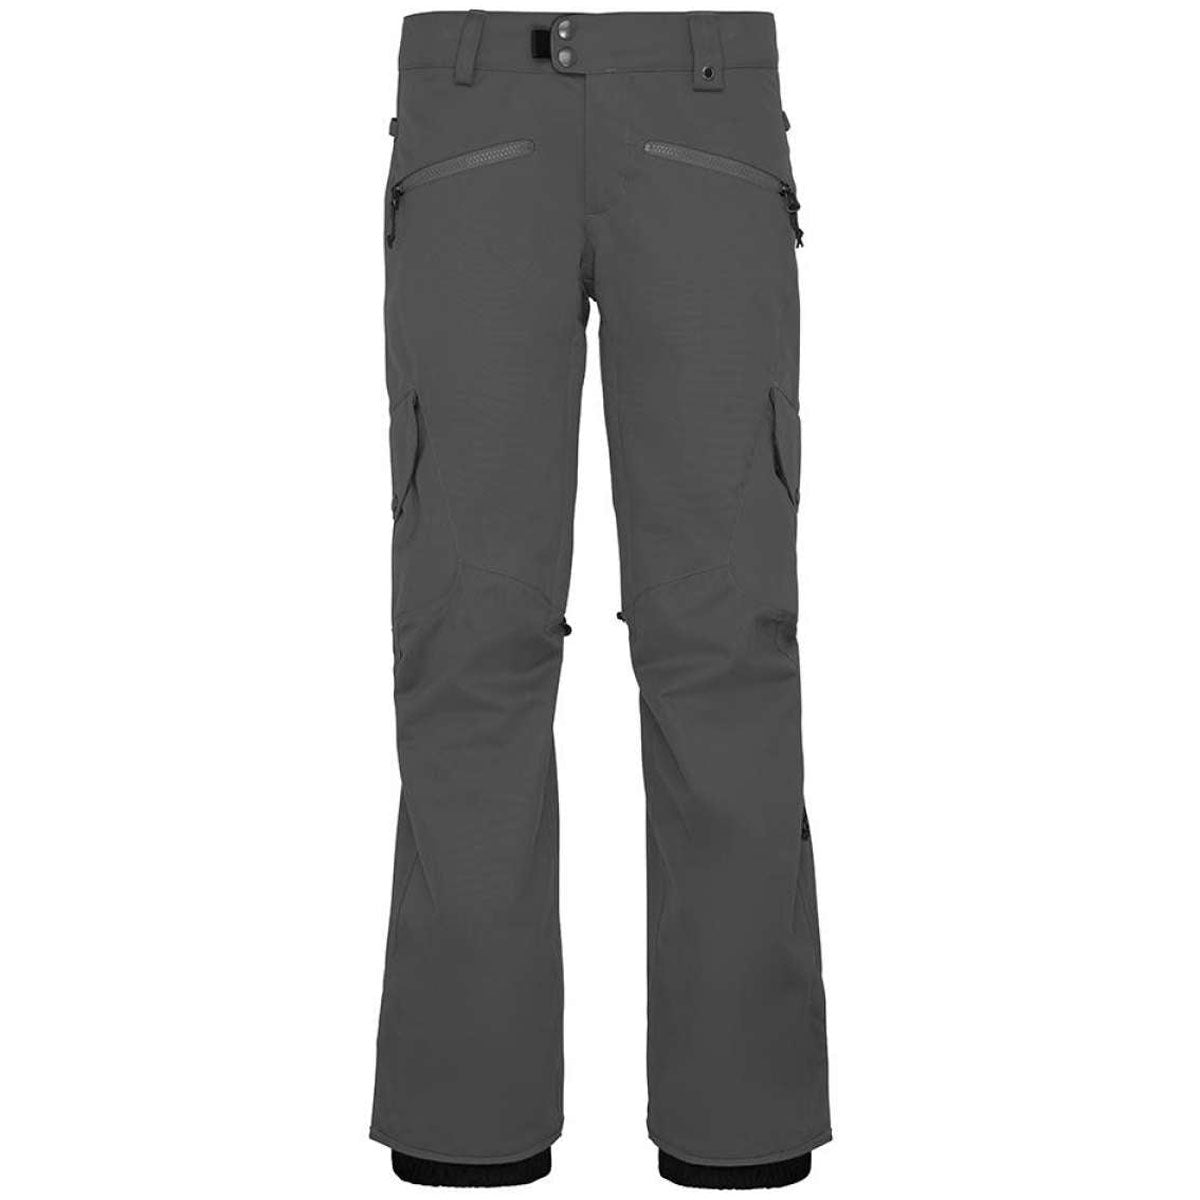 686 Womens Aura Insulated Cargo Snowboard Pants - Charcoal image 1